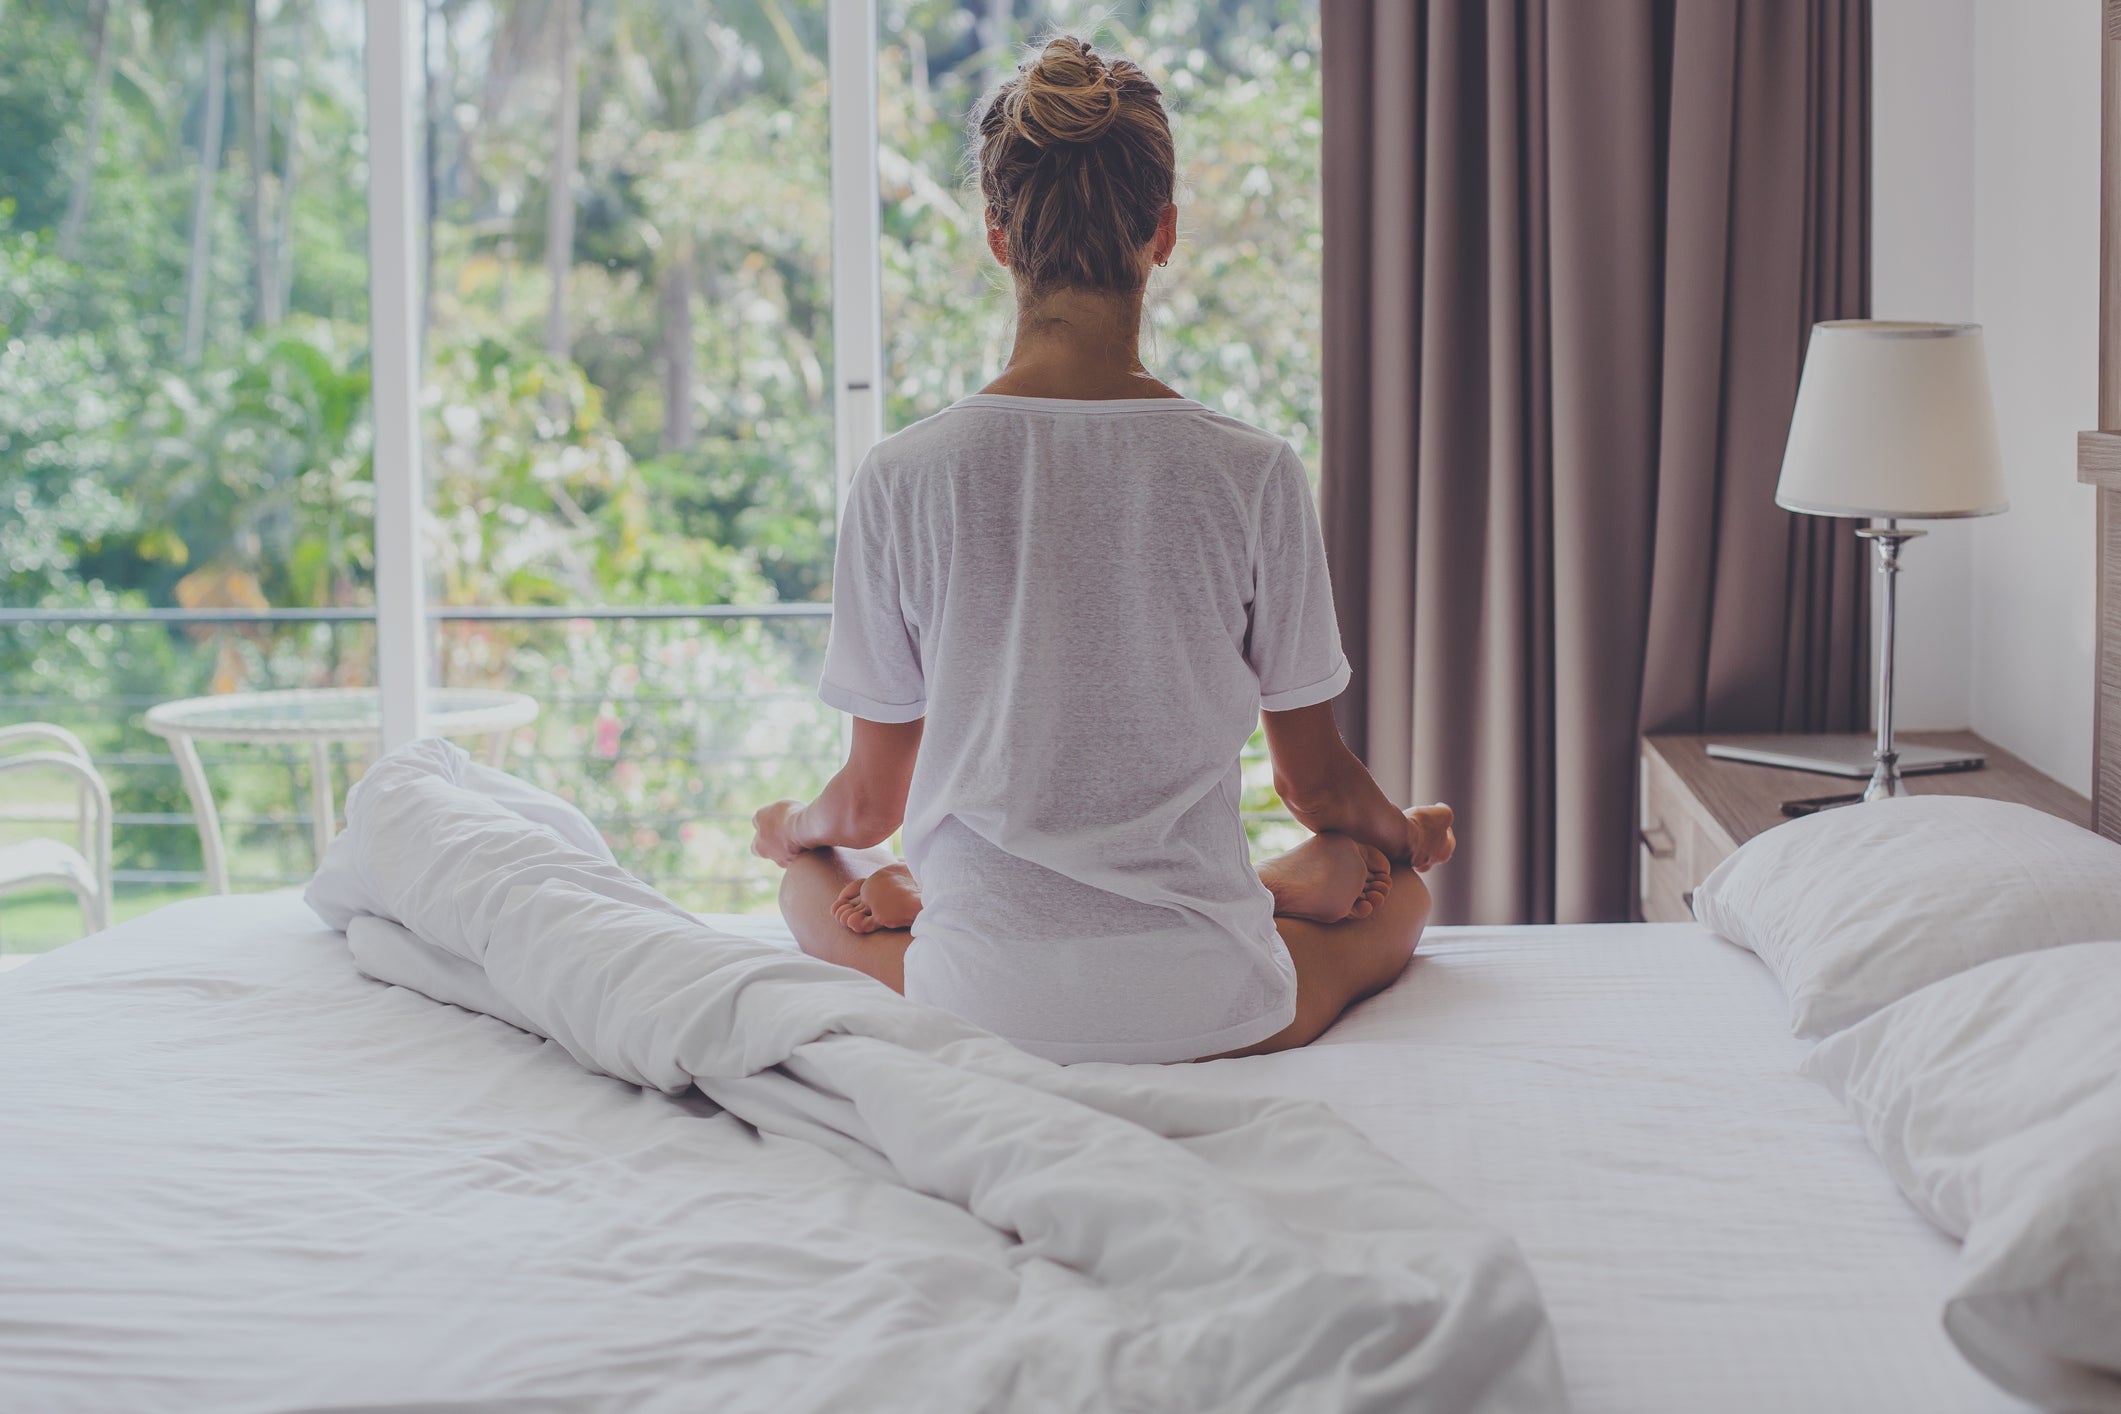 It may be best to try meditating first thing in the morning